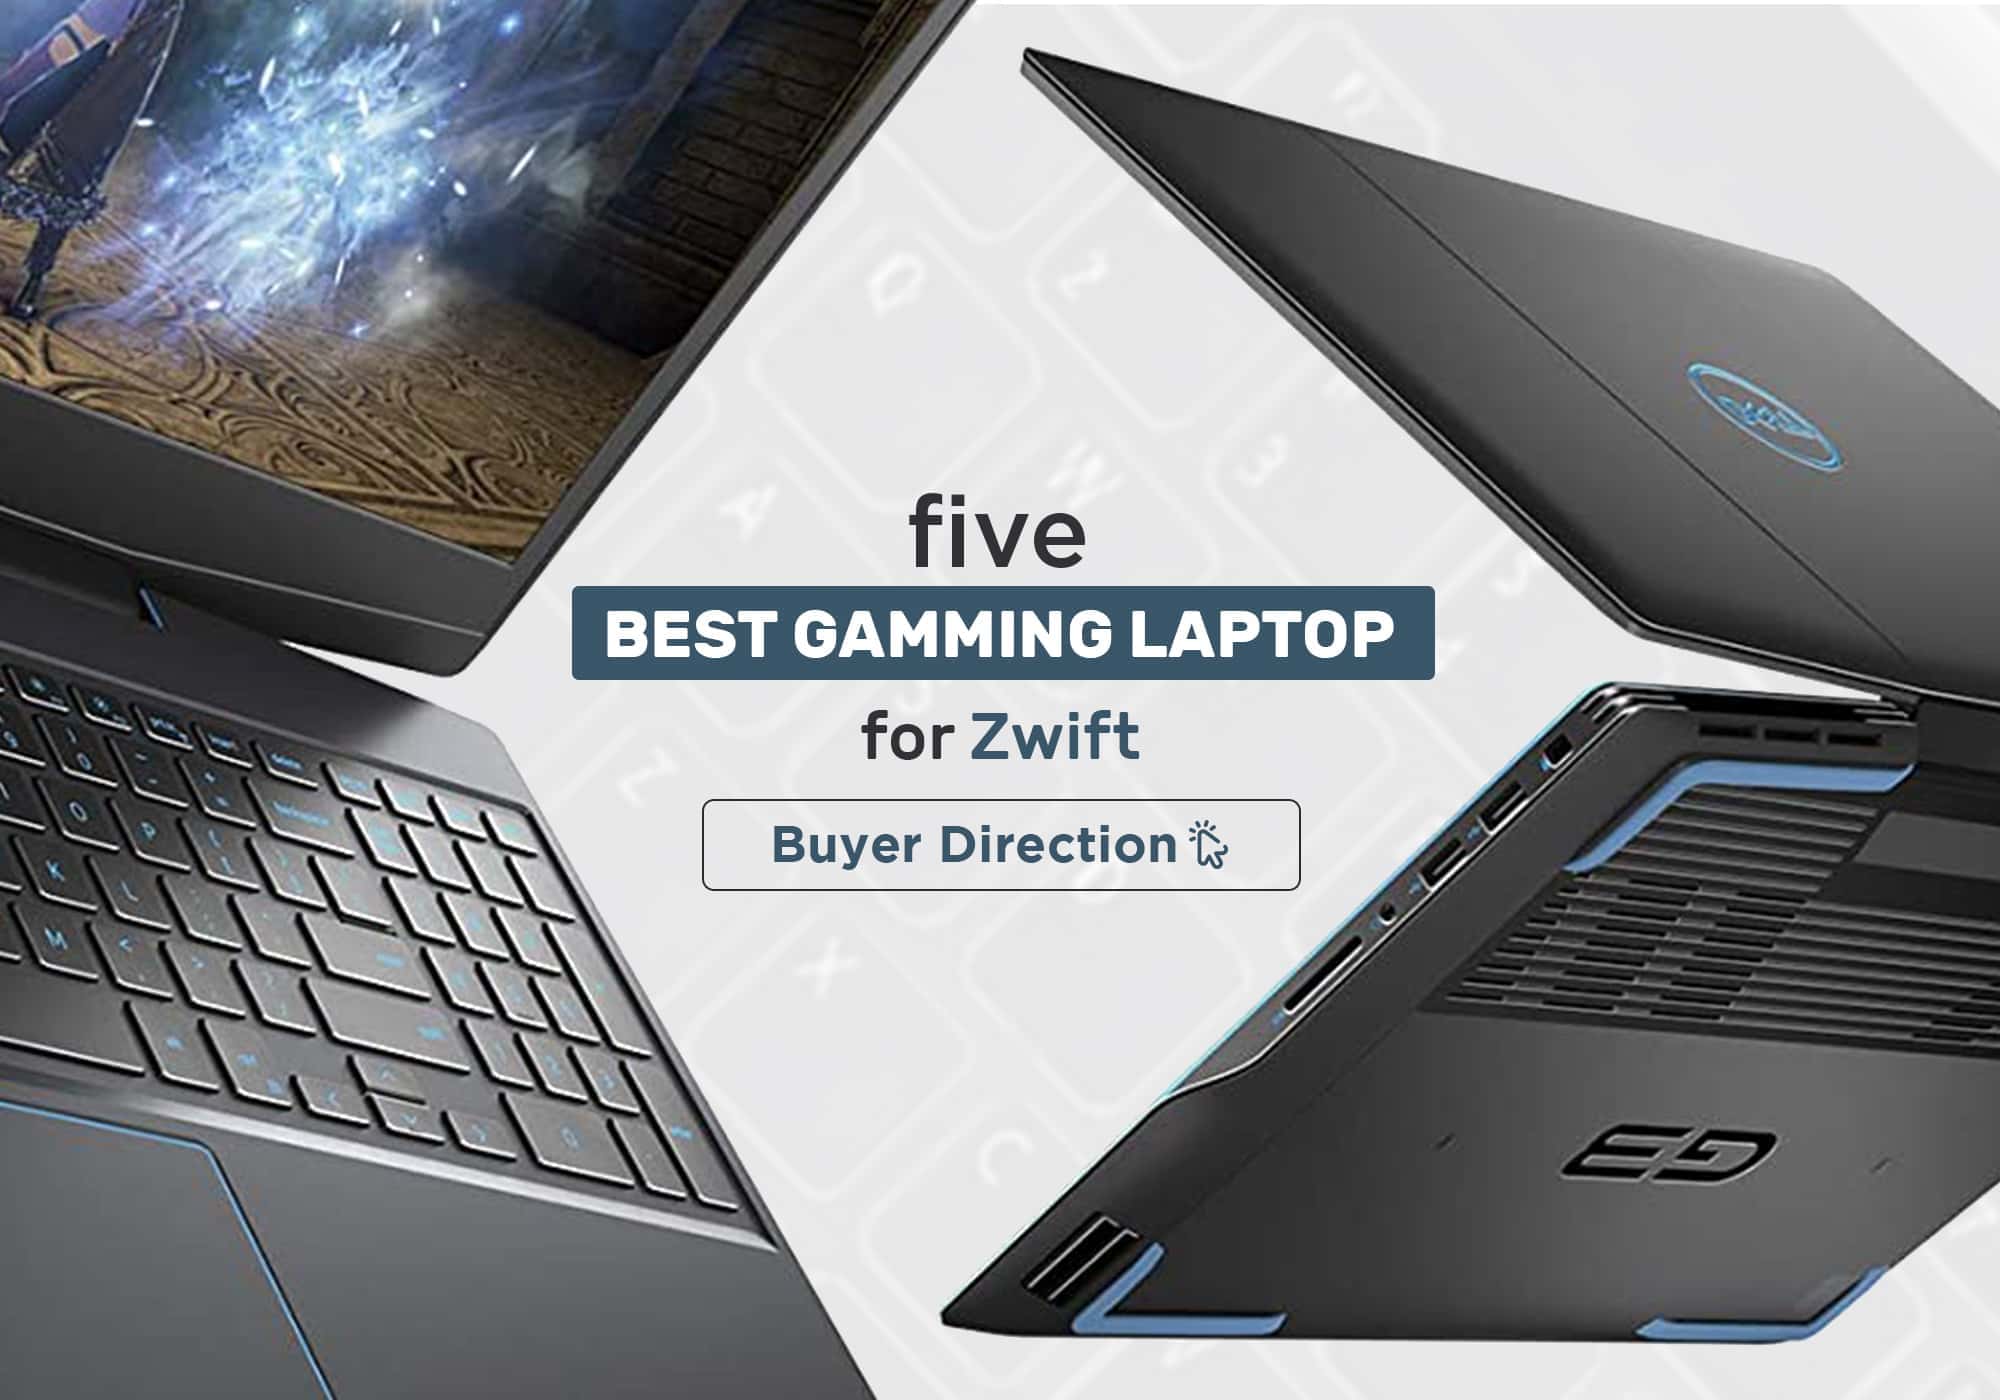 5 Best Gaming Laptops for Zwift [Reviews]